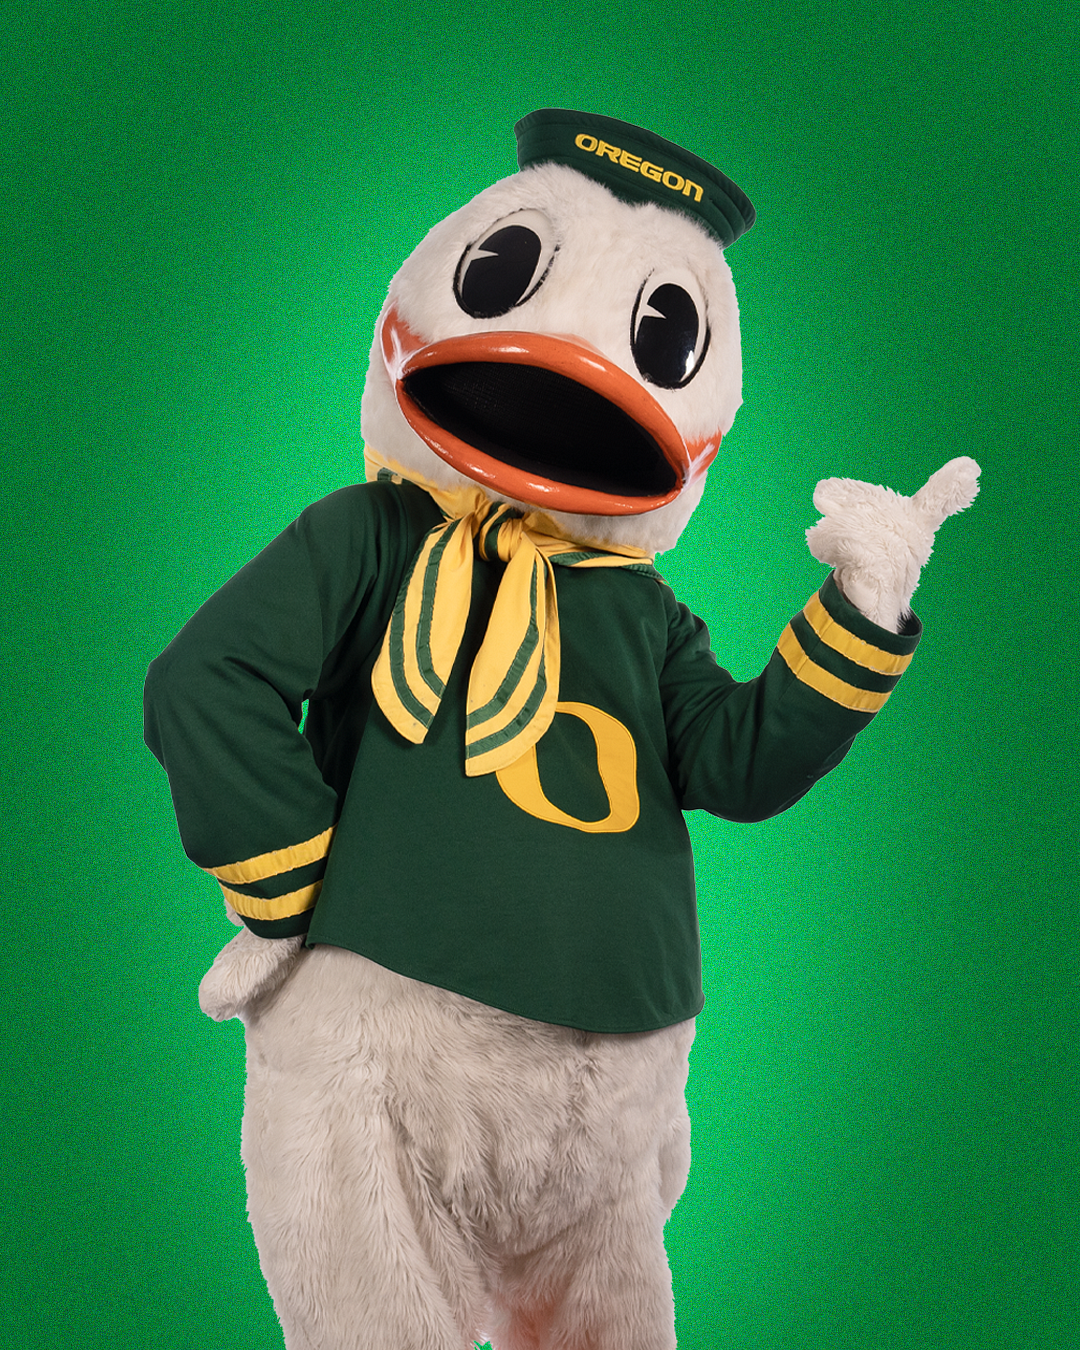 the oregon duck posing in front of uo green solid color background